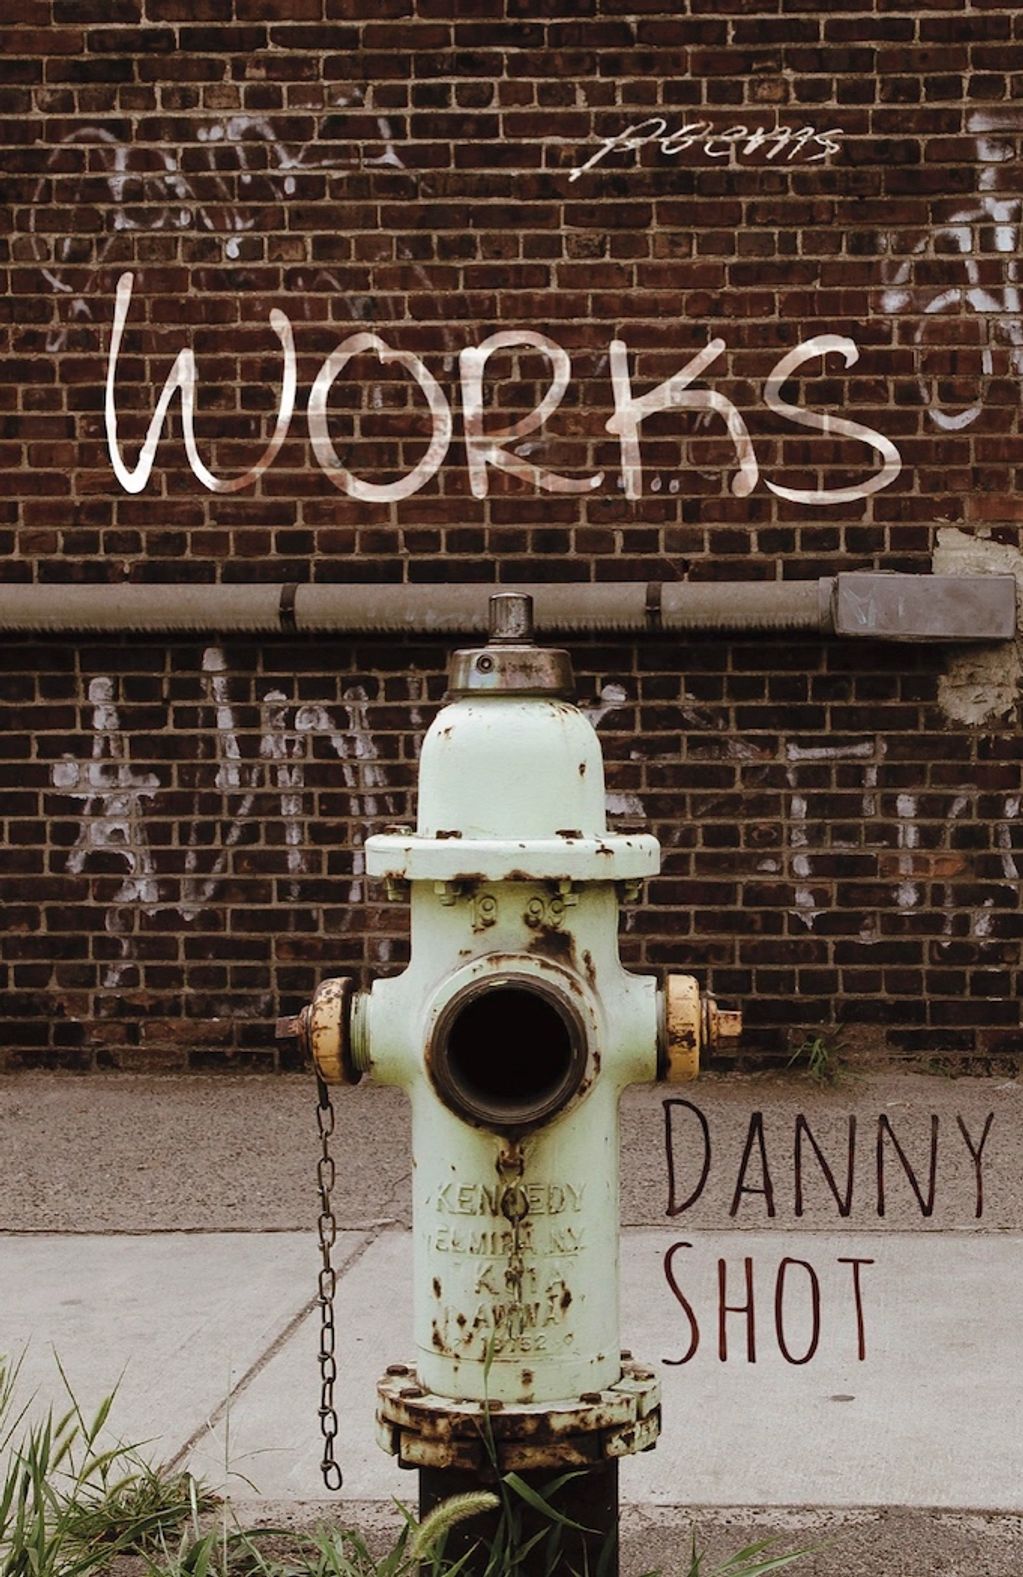 Front Cover book by Danny Shot WORKS